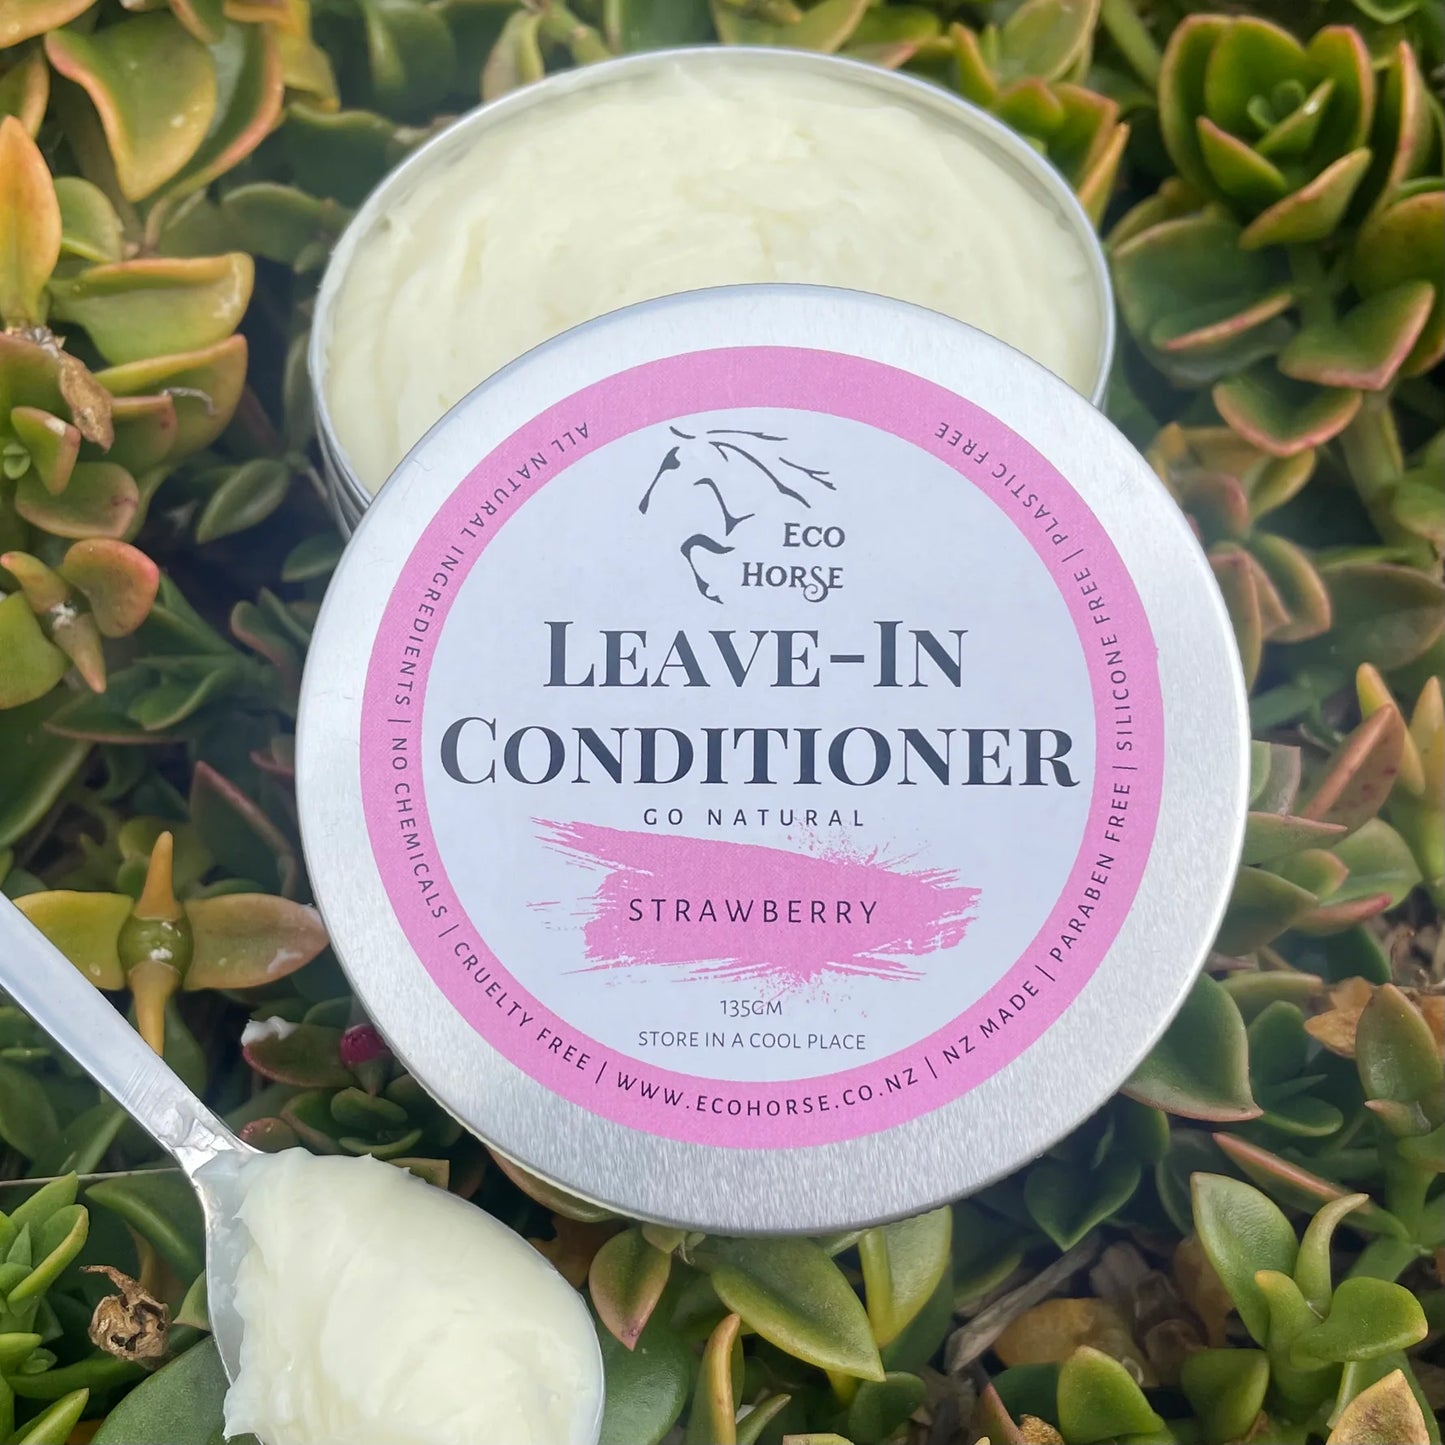 Mane & Tail Leave In Conditioner